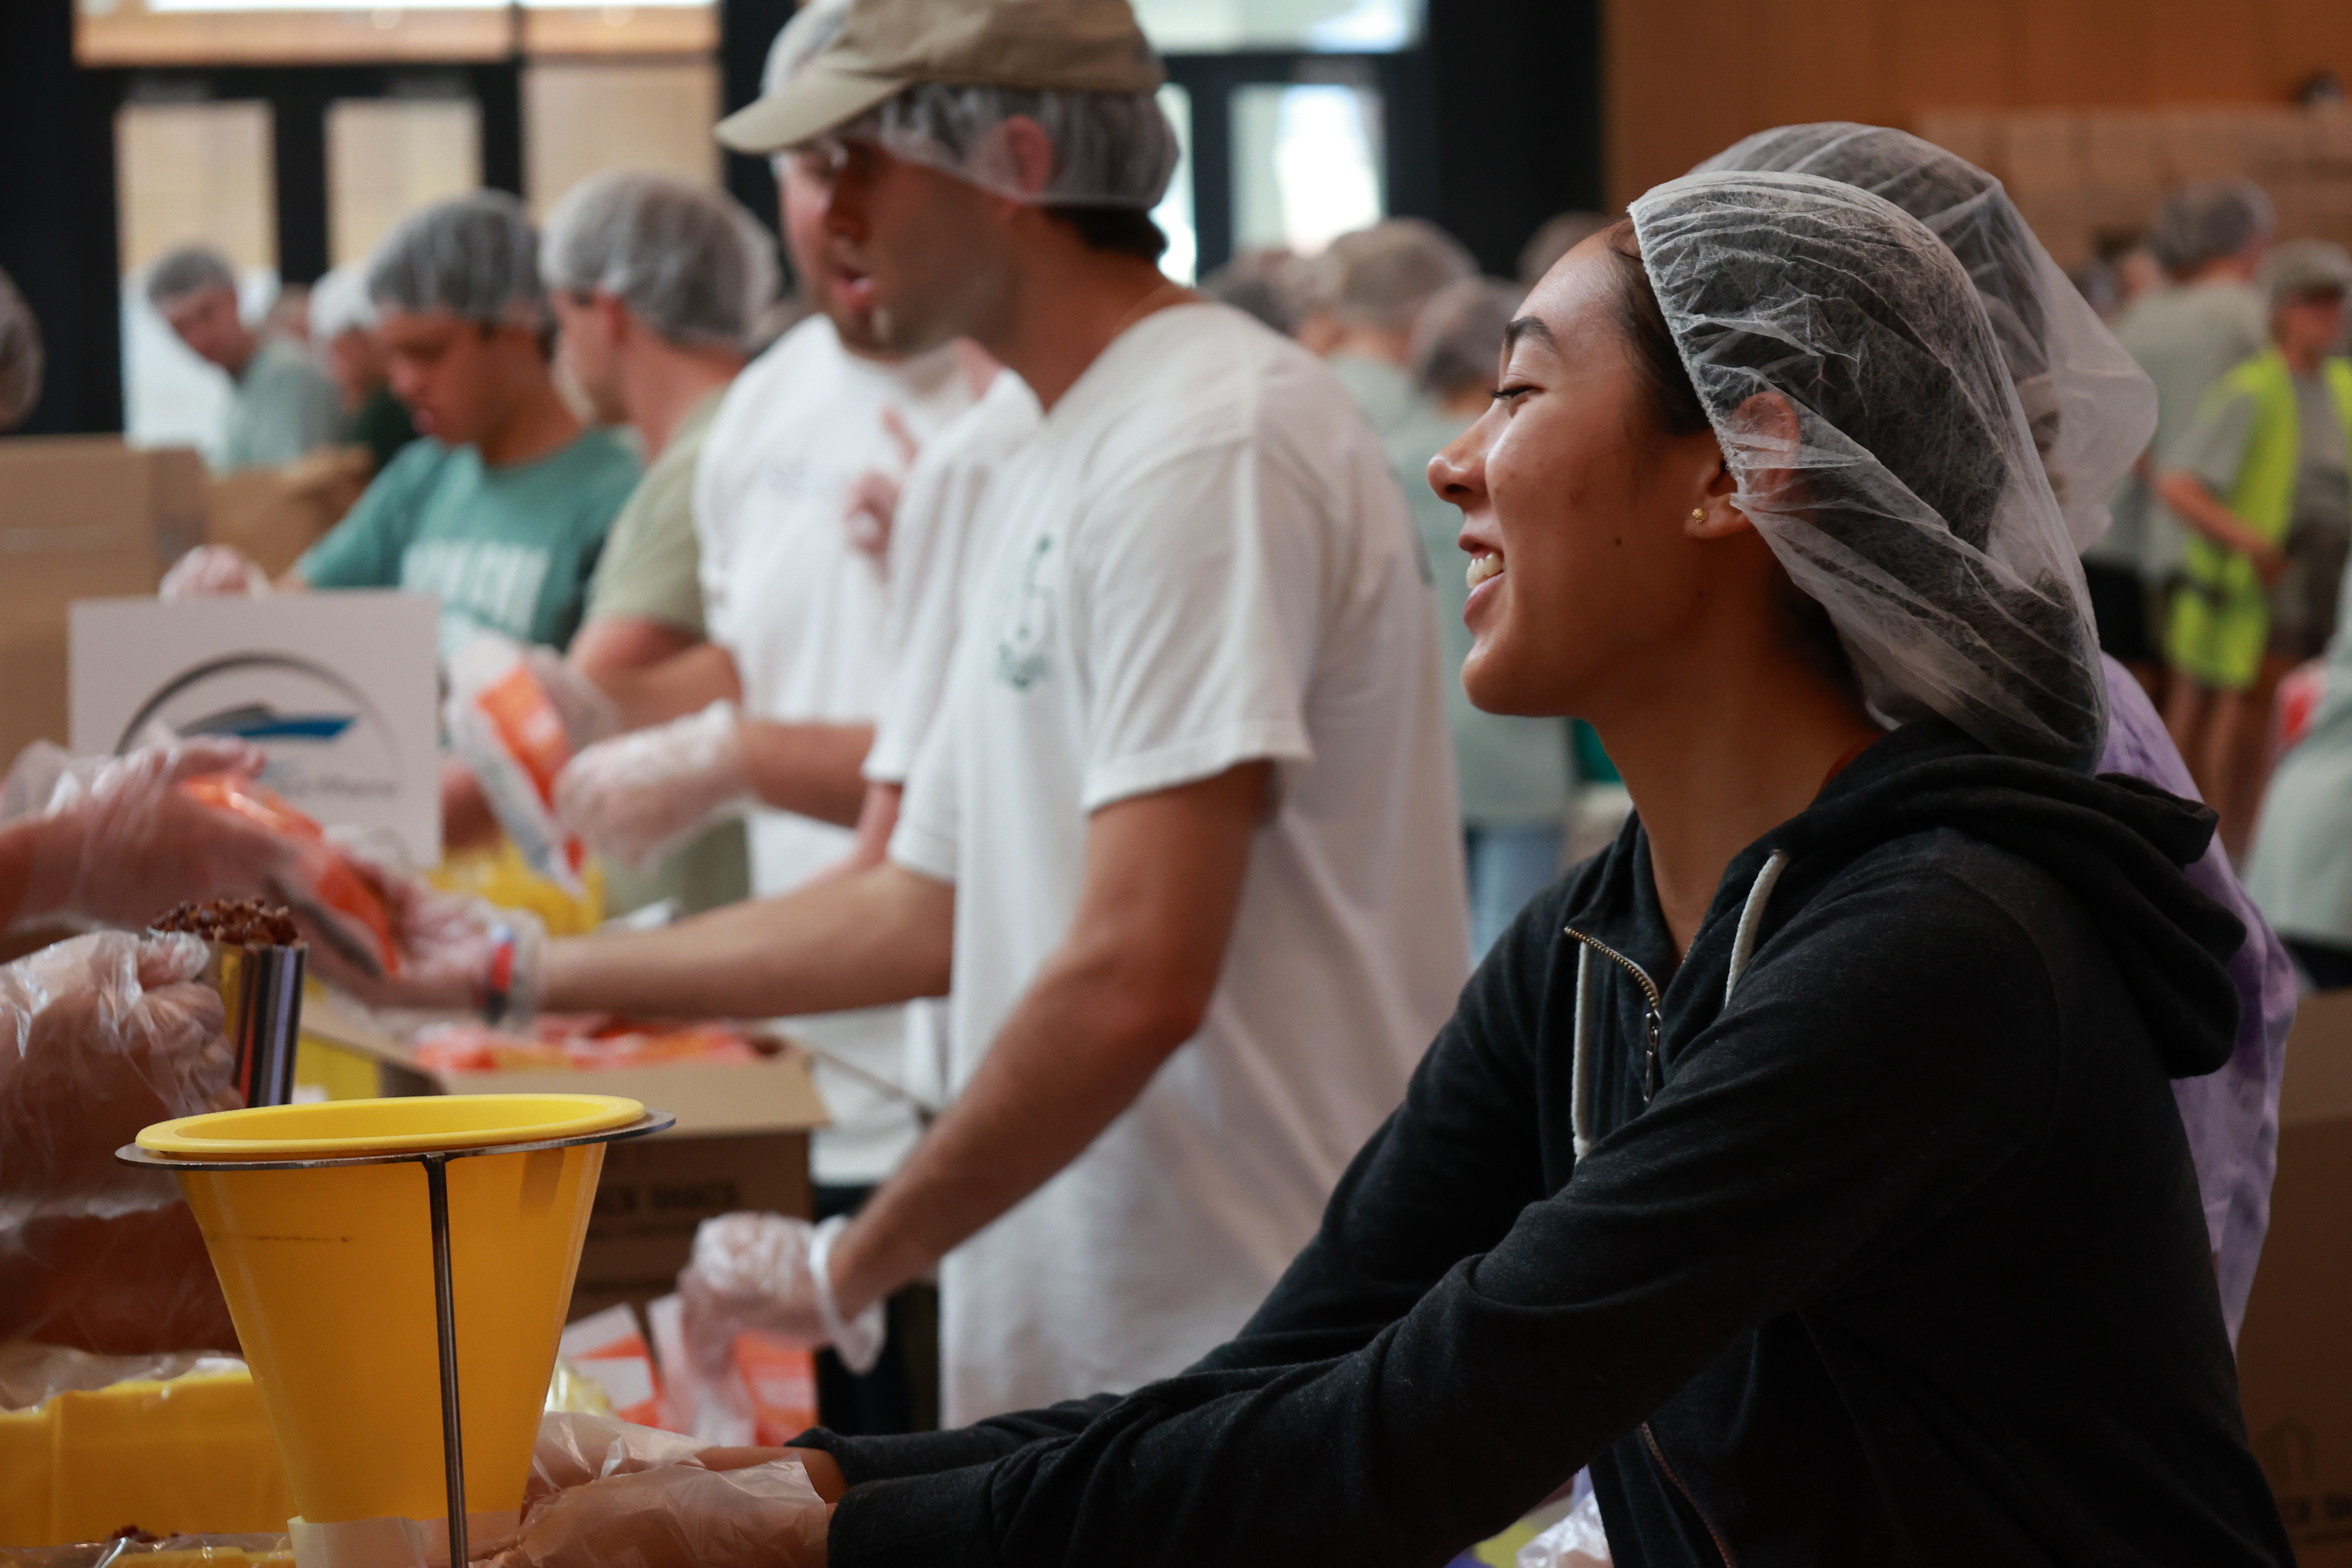 Smiling Woman packing meals for 58:10 Project